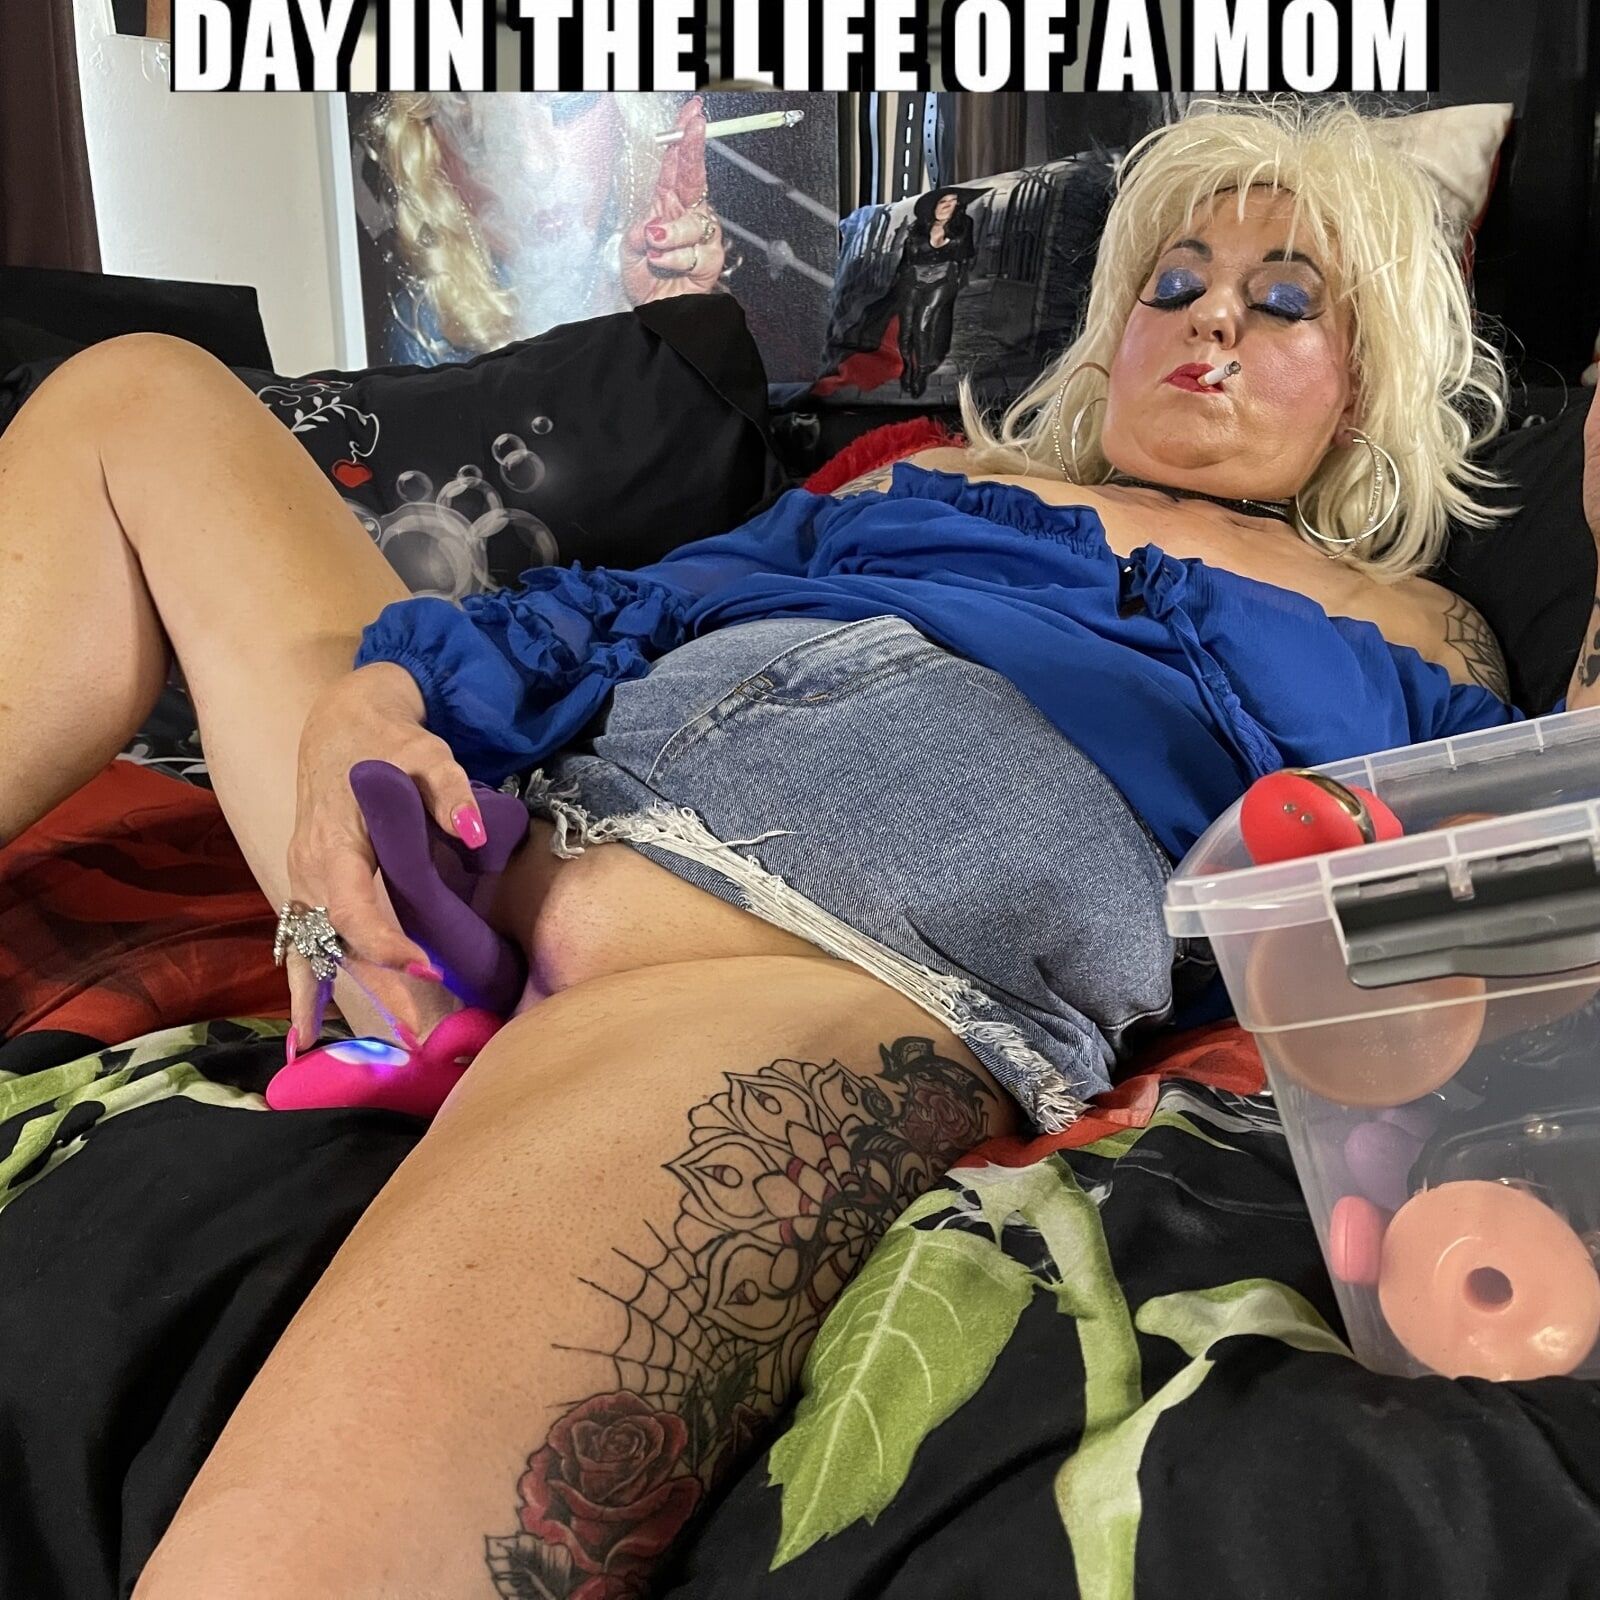 SHIRLEY THE LIFE OF A MOM #8